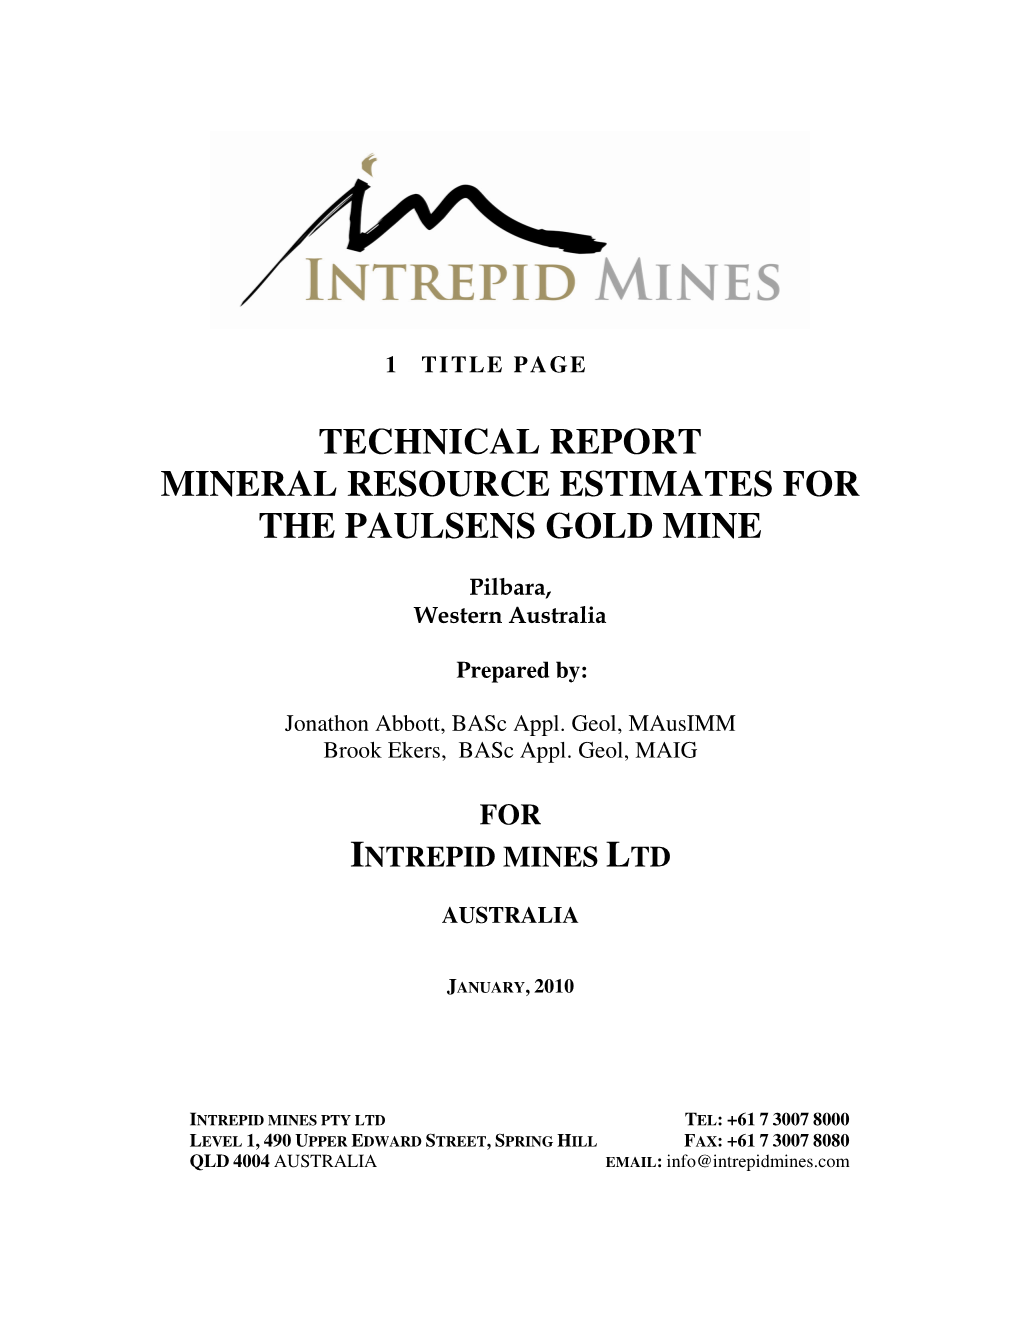 Technical Report Mineral Resource Estimates for the Paulsens Gold Mine